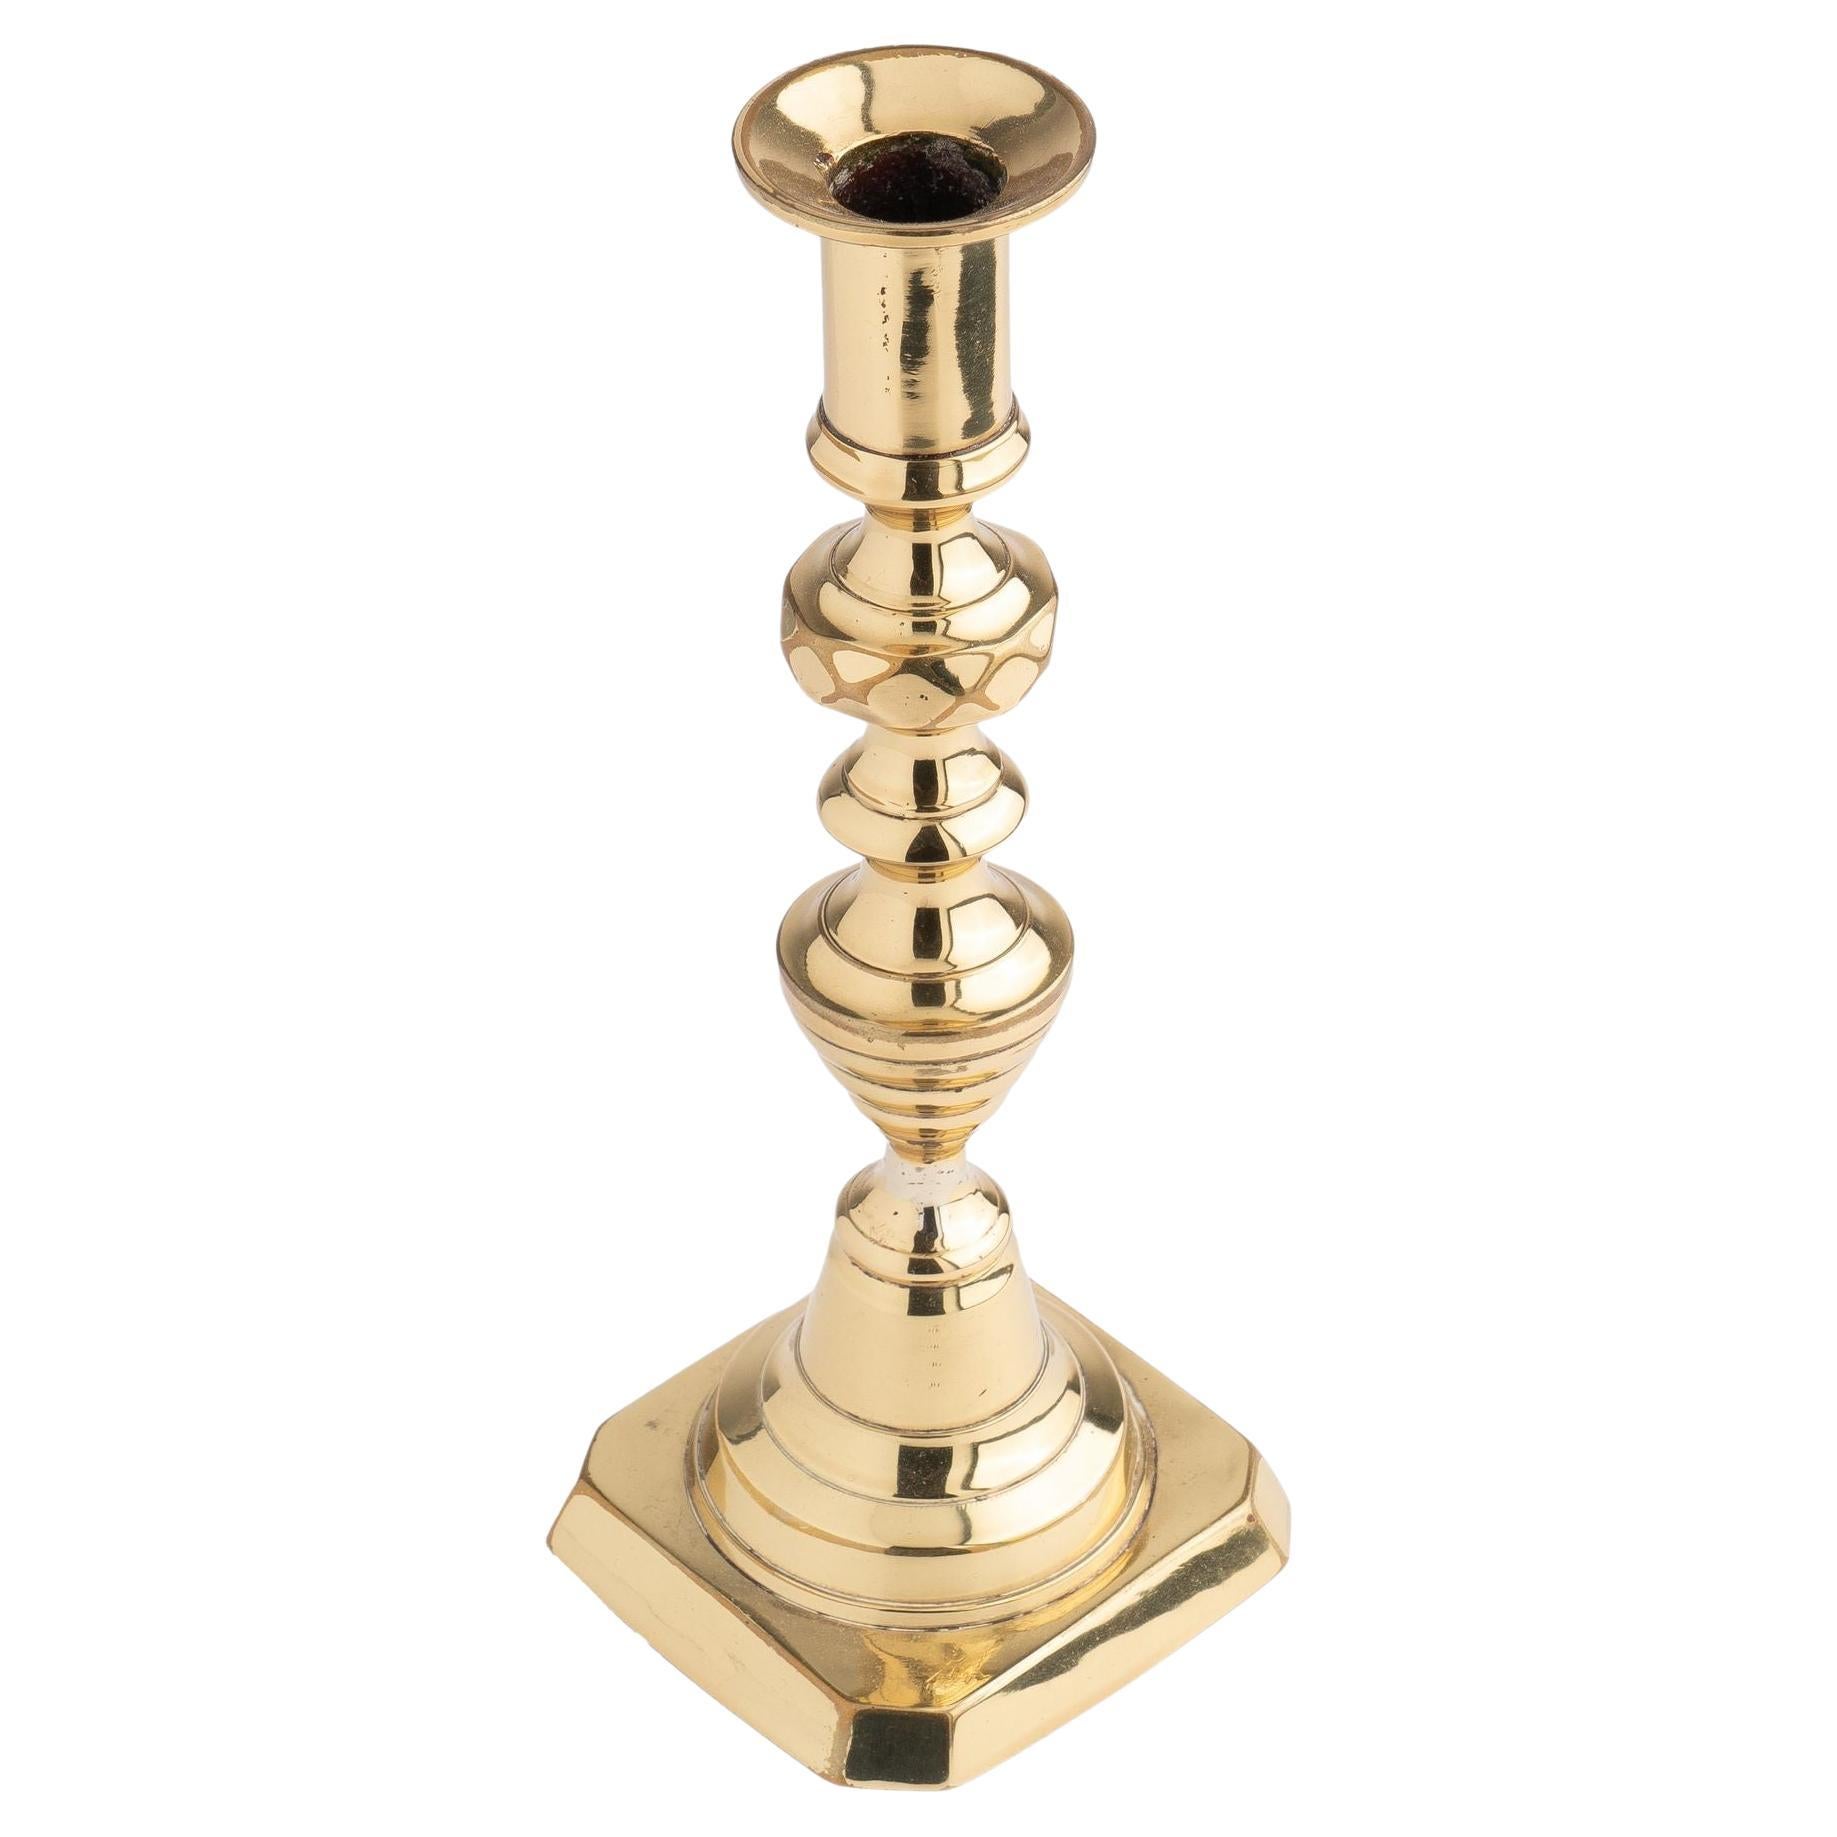 English cast brass beehive push-up candlestick, c. 1840 For Sale